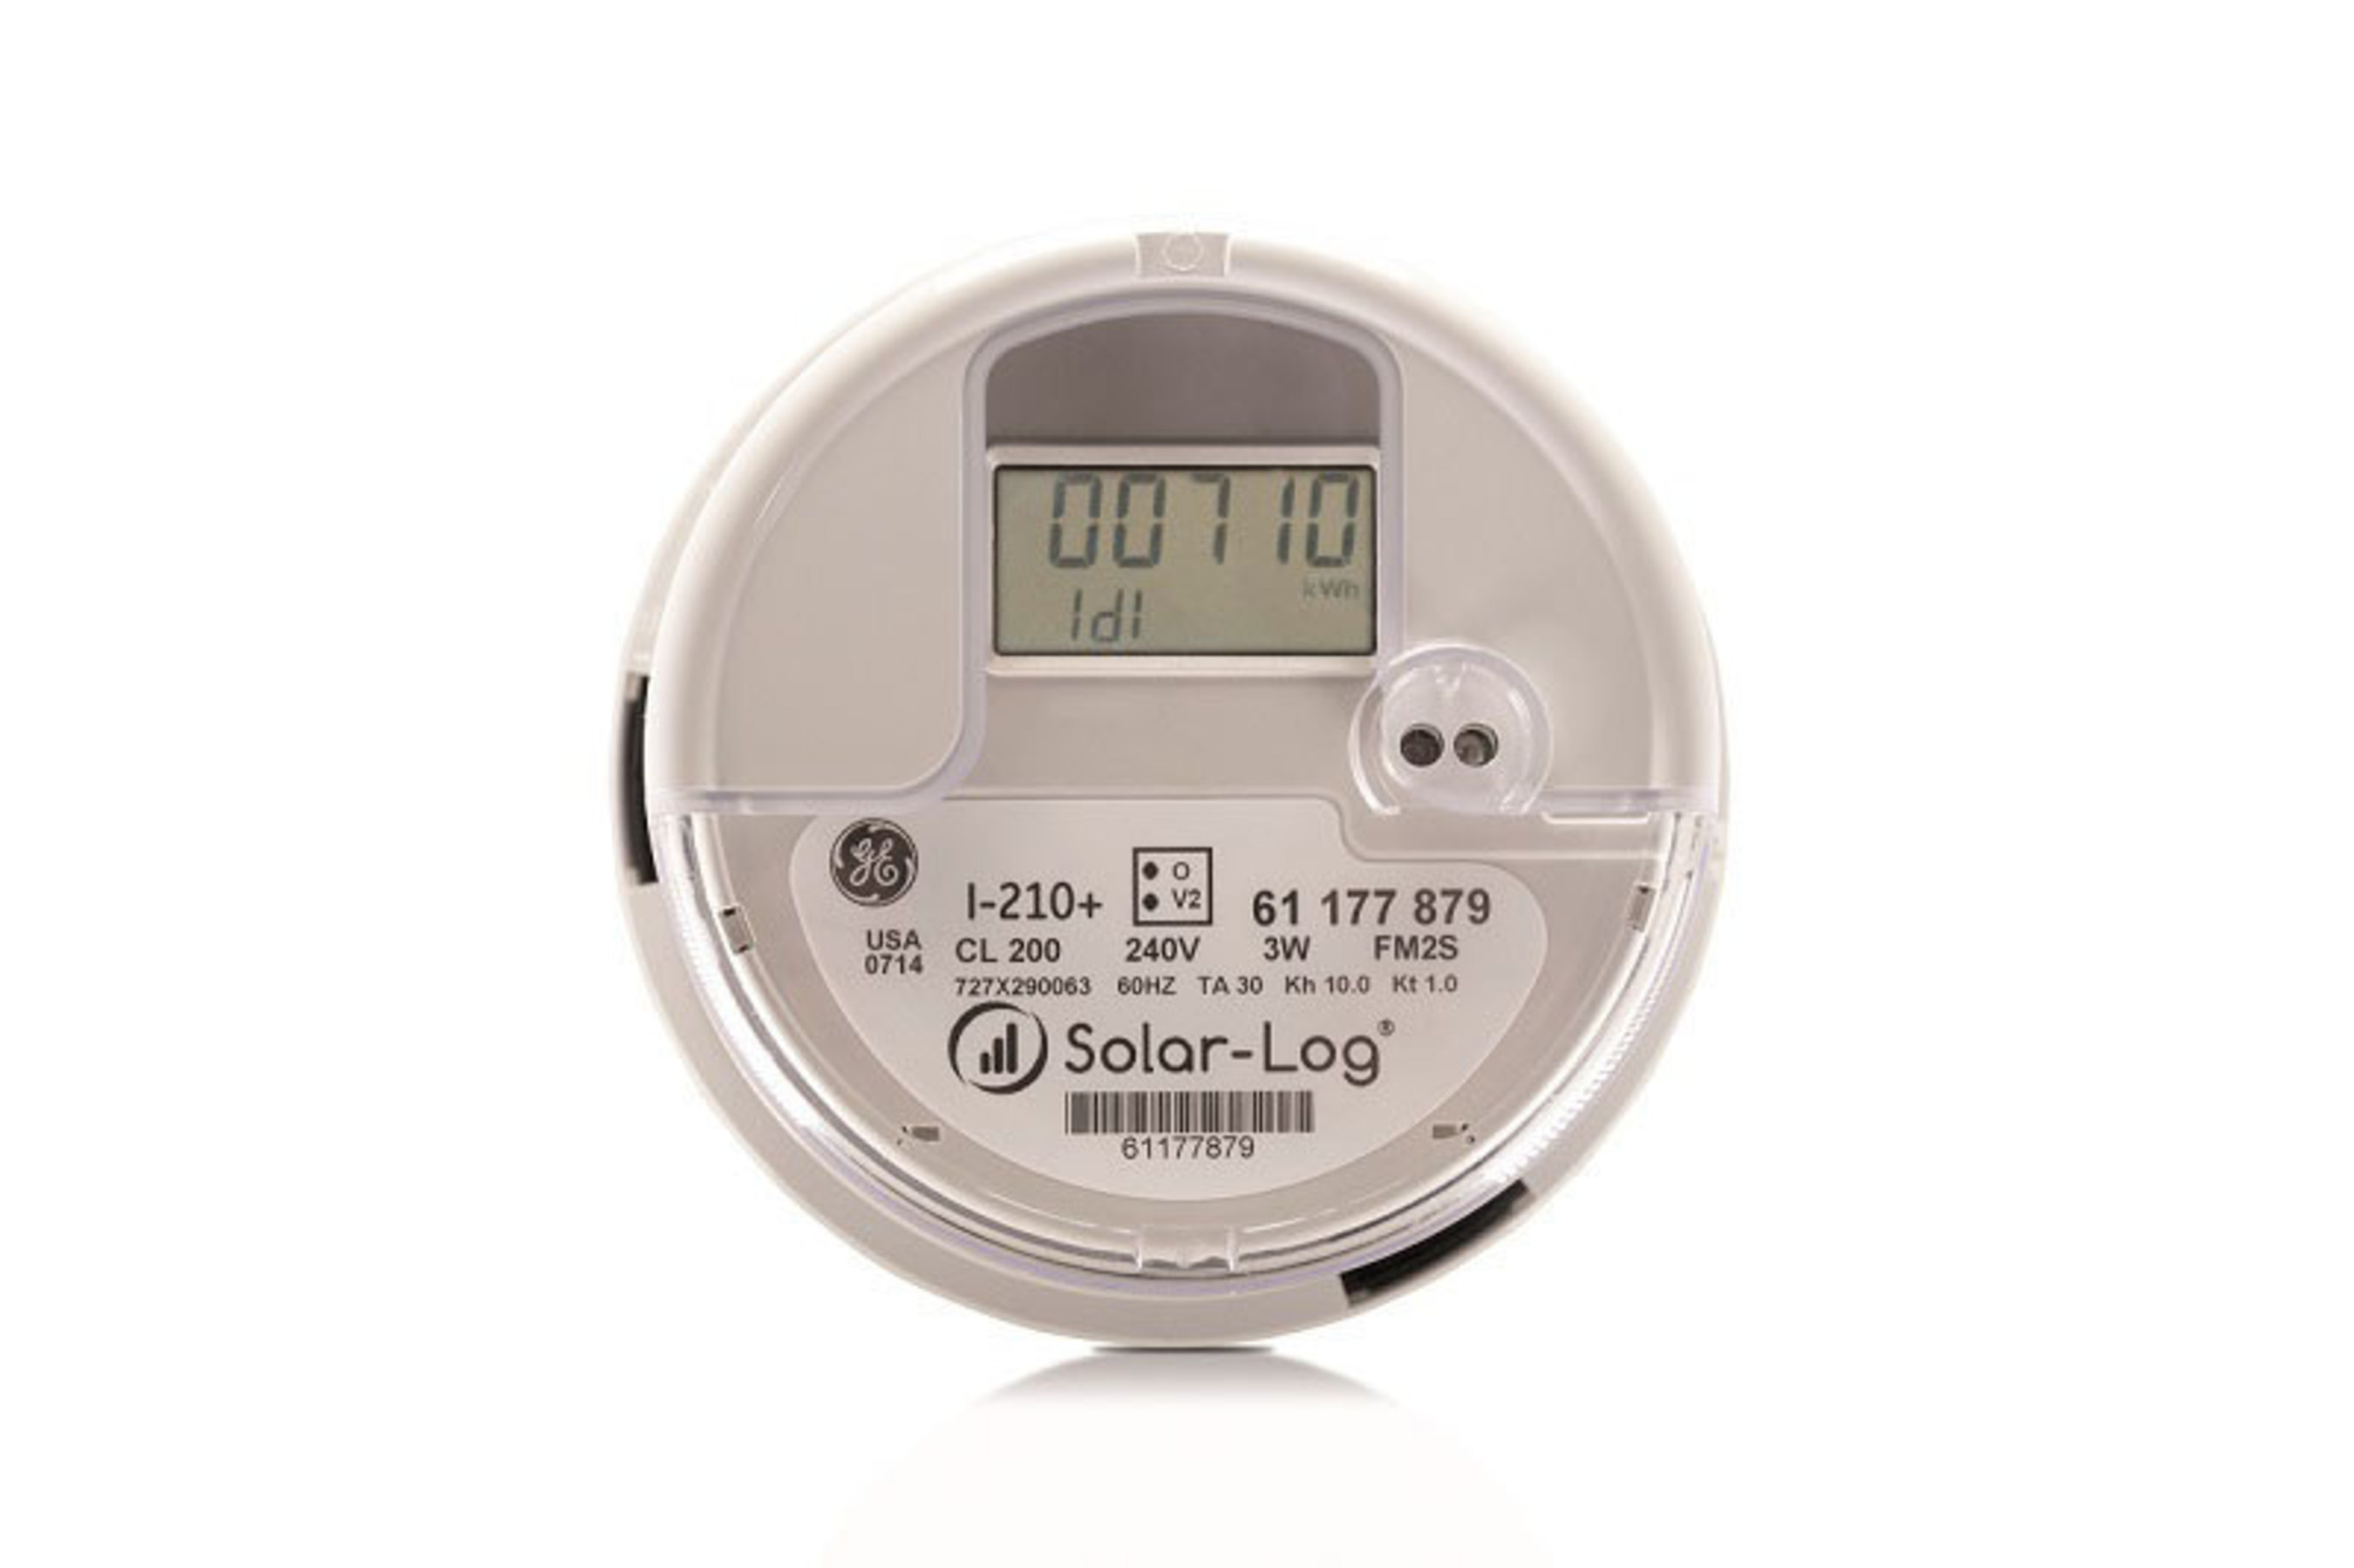 The Solar-Log(R) & GE Meter is a cellular-based, revenue grade, solar PV monitoring device that is simple to install and easy to use. A compact design with proven Solar-Log(R) technology and GE's I-210+ residential meter. Options include consumption monitoring, inverter direct, power management, and weather station. Includes 5 years of cellular data plan and Solar-Log(R) WEB monitoring. www.solar-log.net